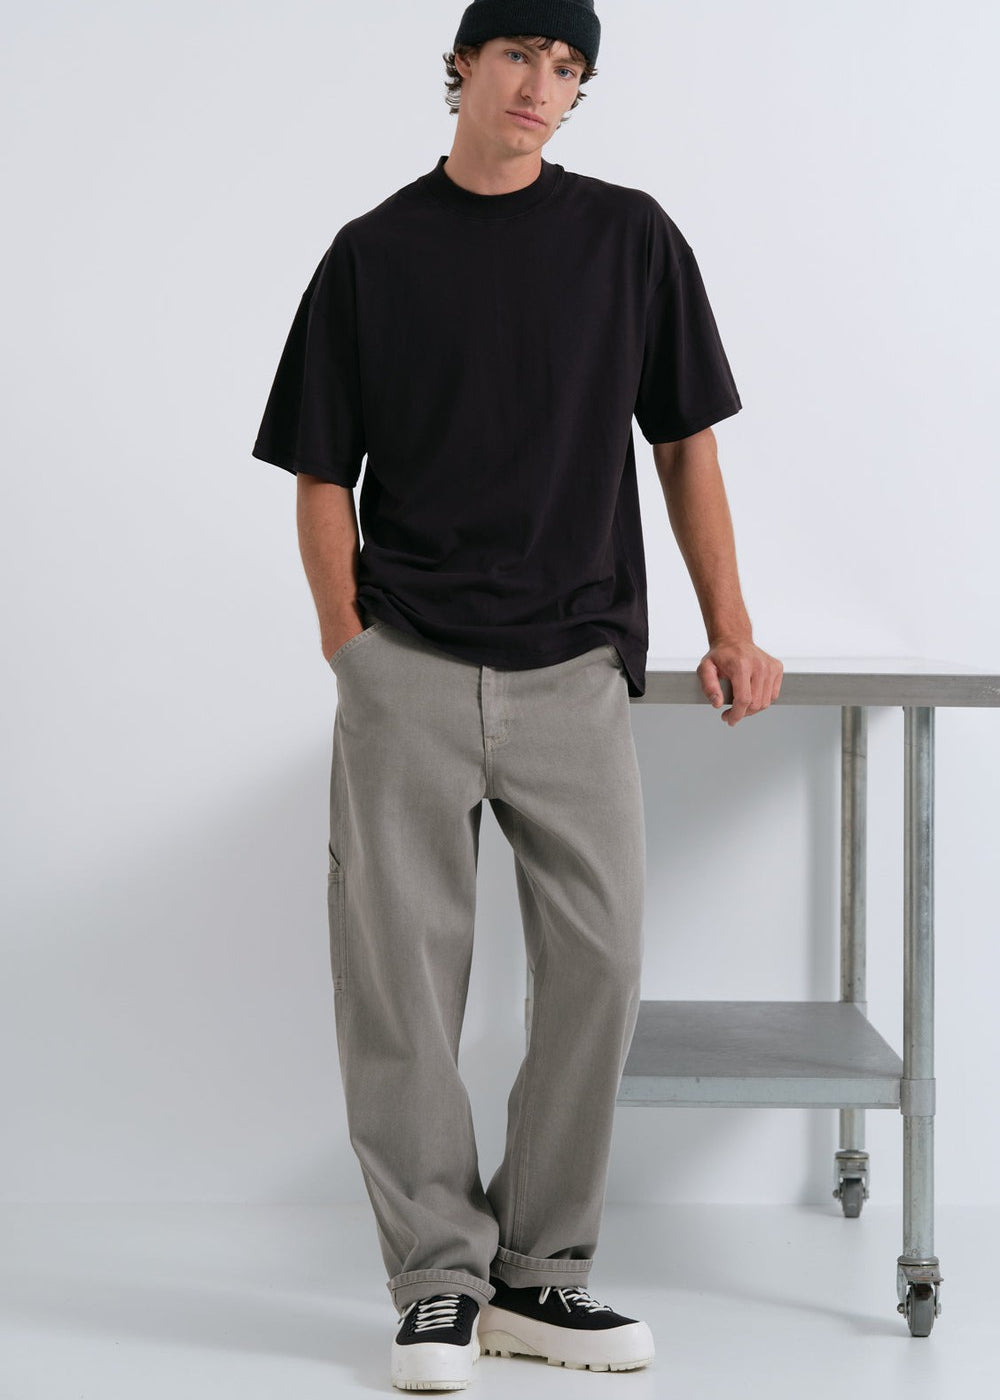 Mens Oversized Tee - Black | COMMONERS | Mad About The Boy